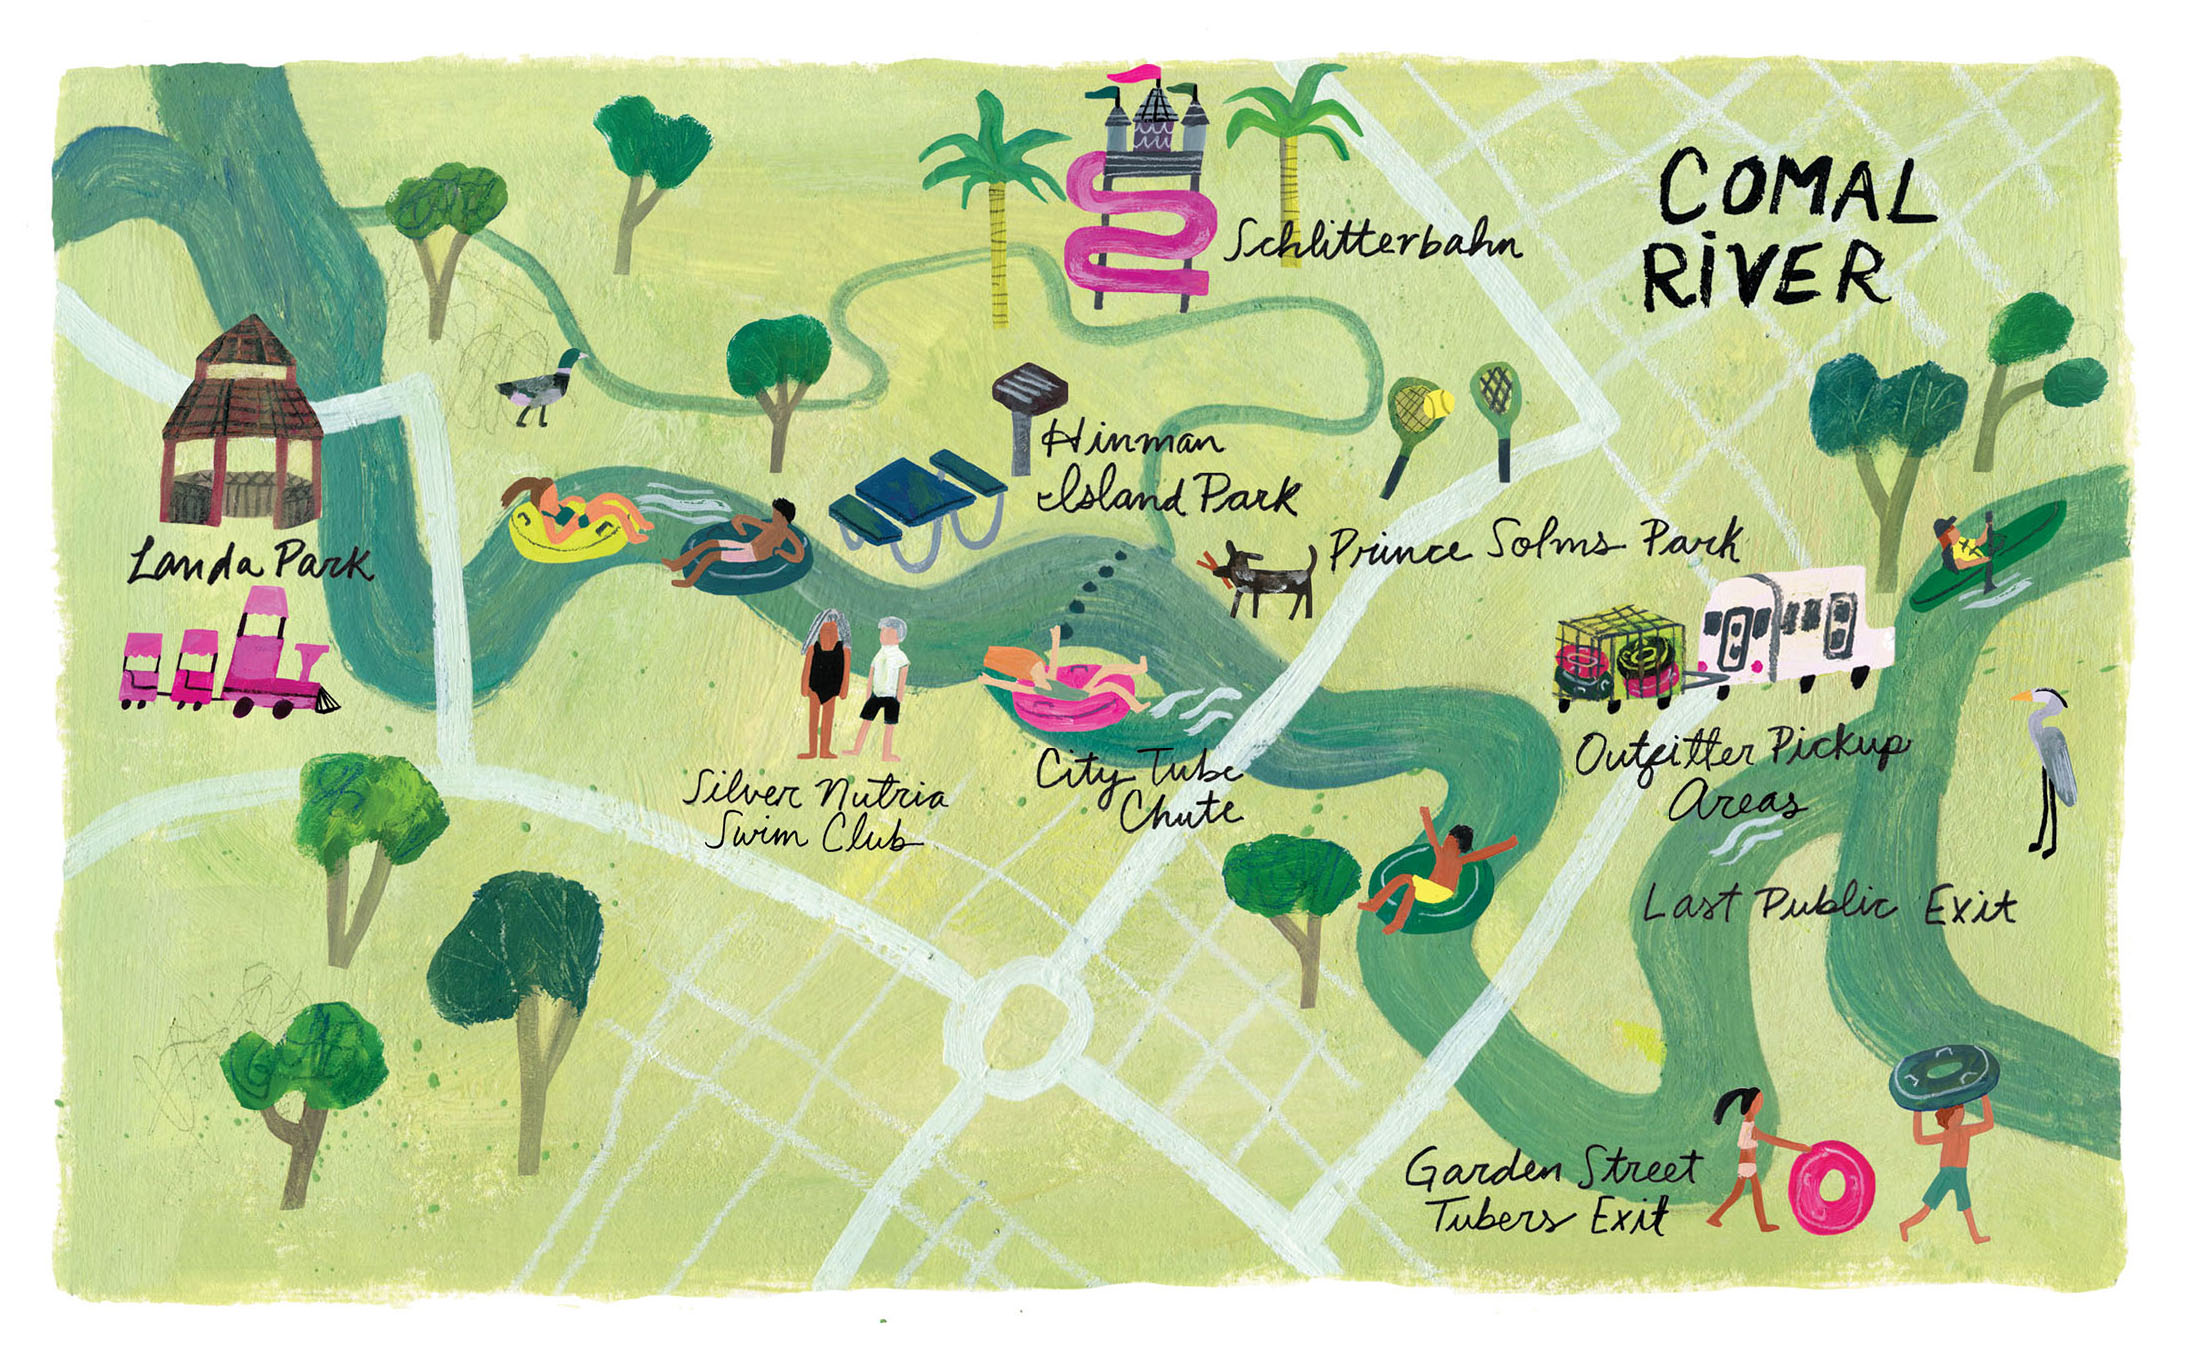 A map of various points along the Comal river